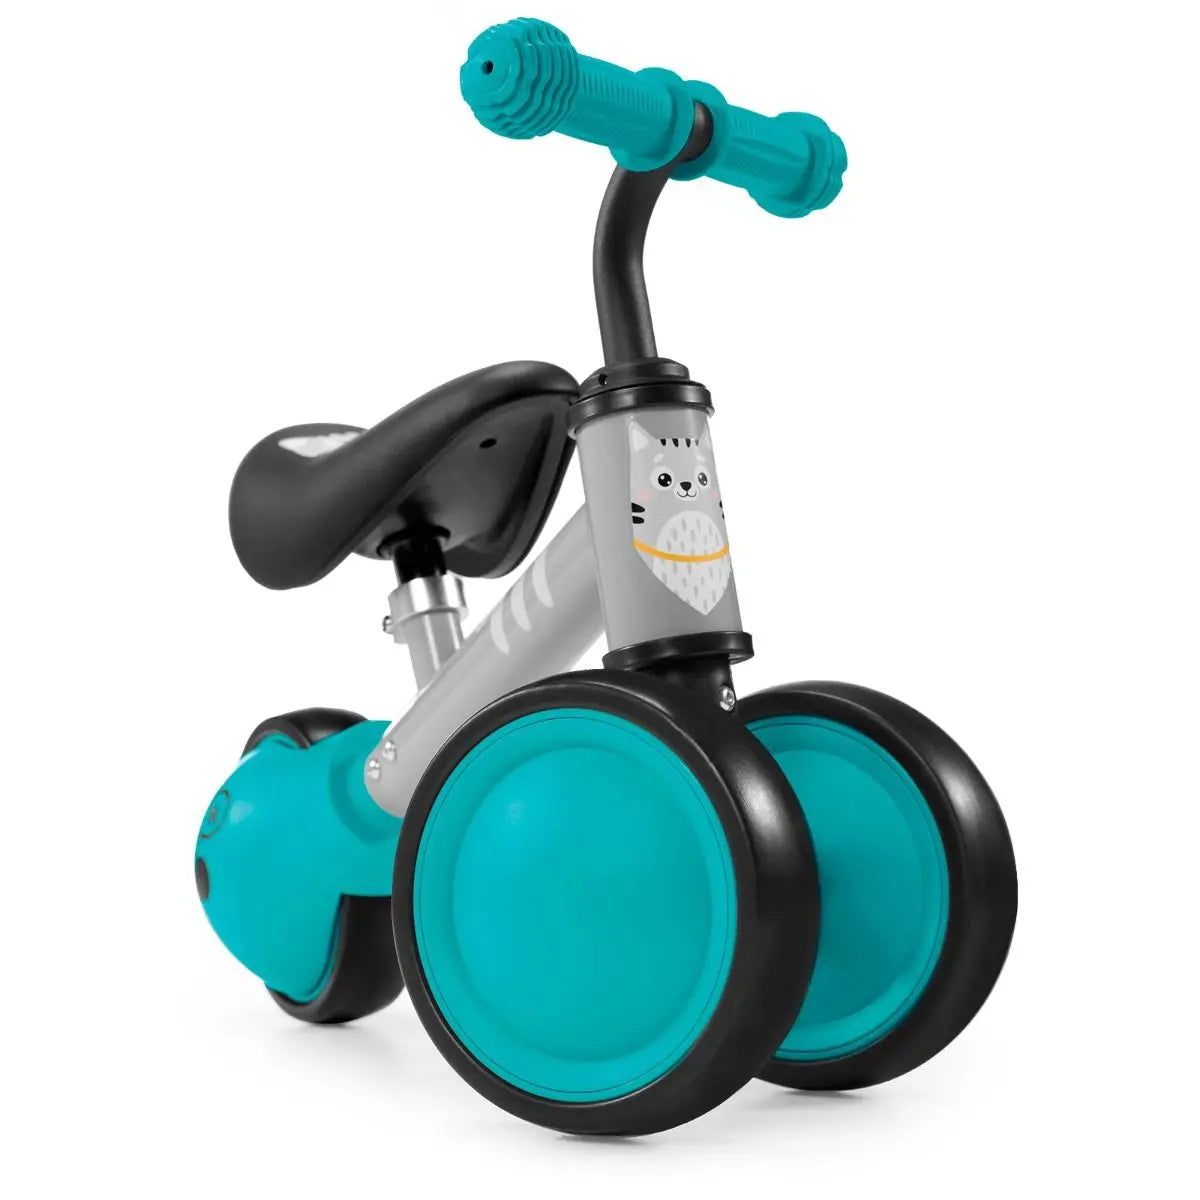 A blue and black tricycle with a kitten print, rubber handles, adjustable saddle, ball-bearing rear wheel, and a strong steel frame for safe and fun balance bike CUTIE play.